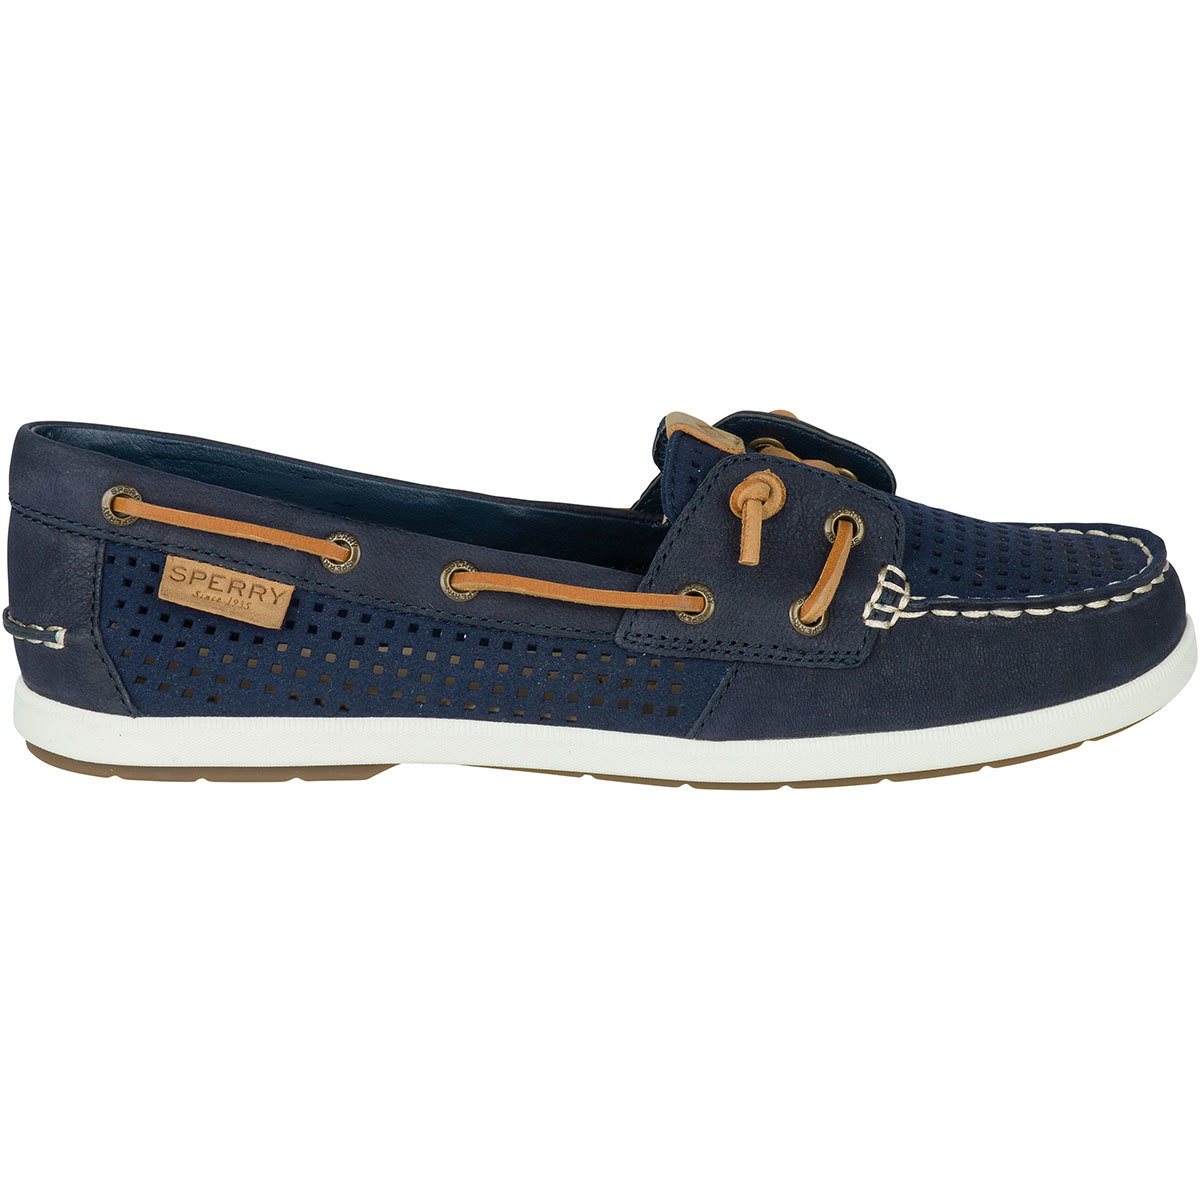 sperry women's boat shoes navy